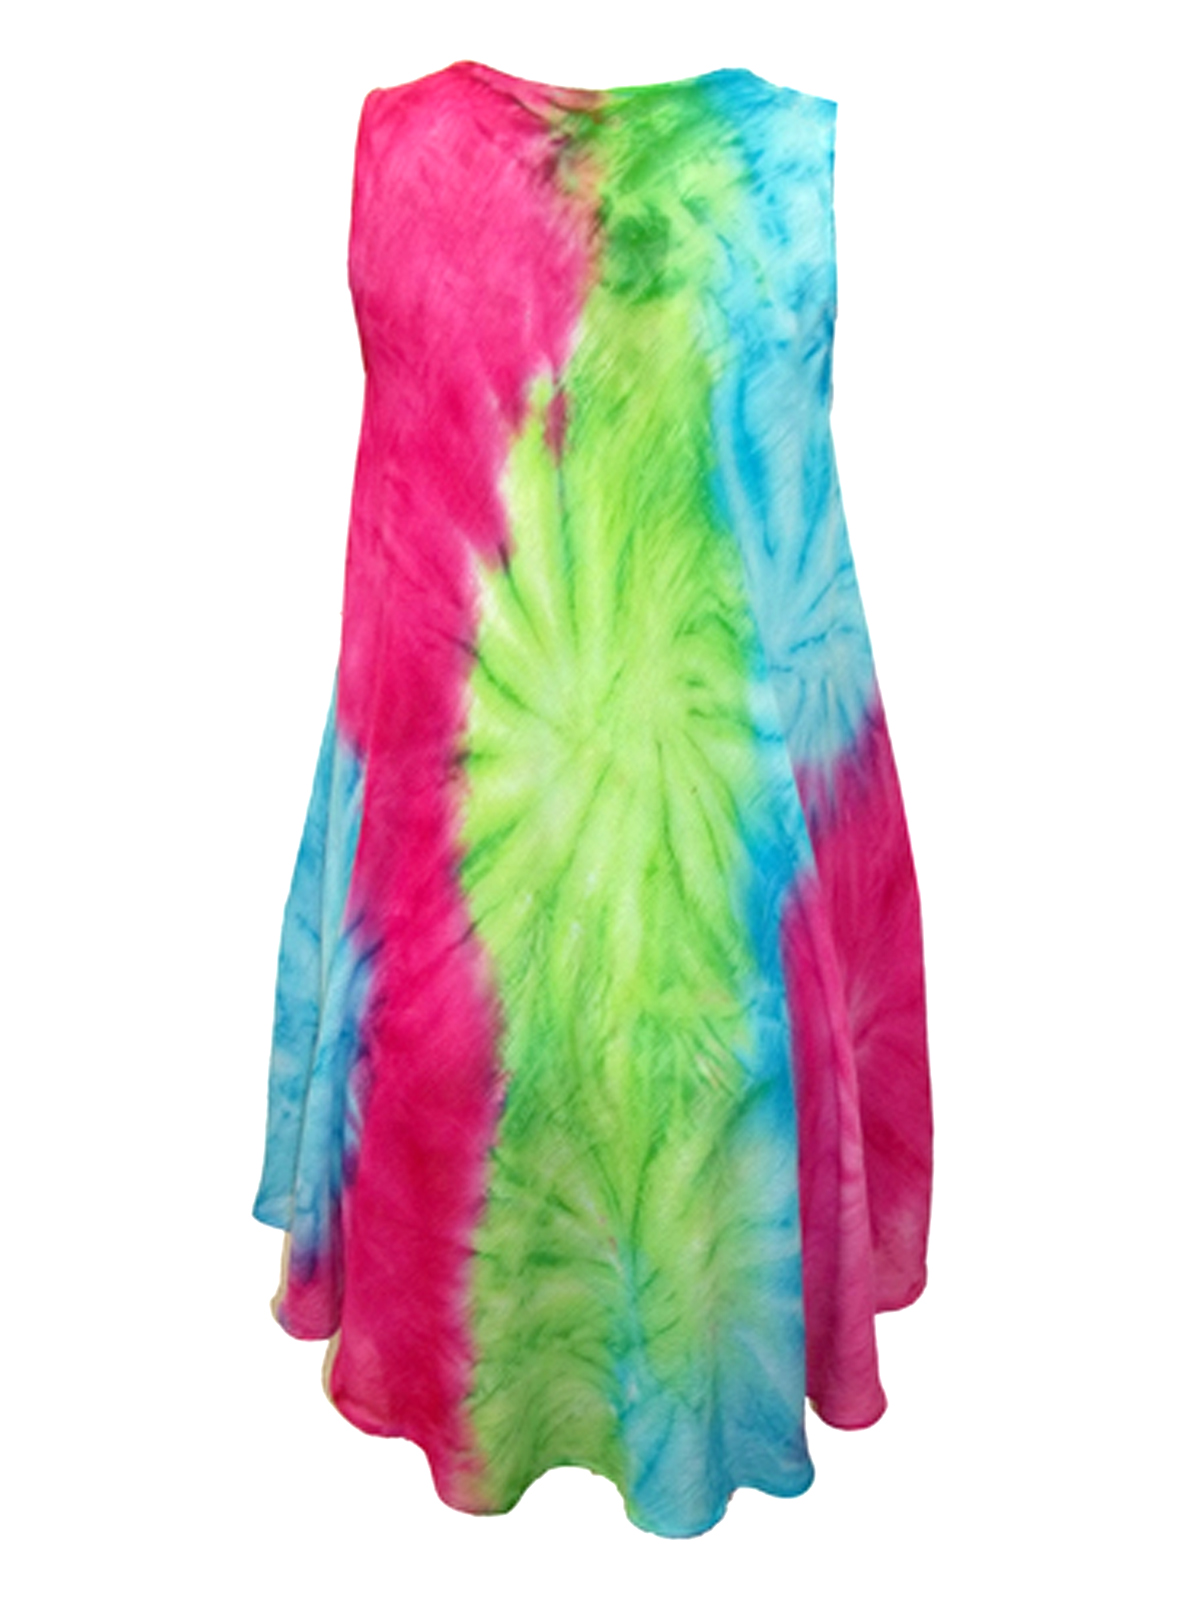 eaonplus Pink/Green/Blue Embroidered Paisley Tie Dye Sundress ...